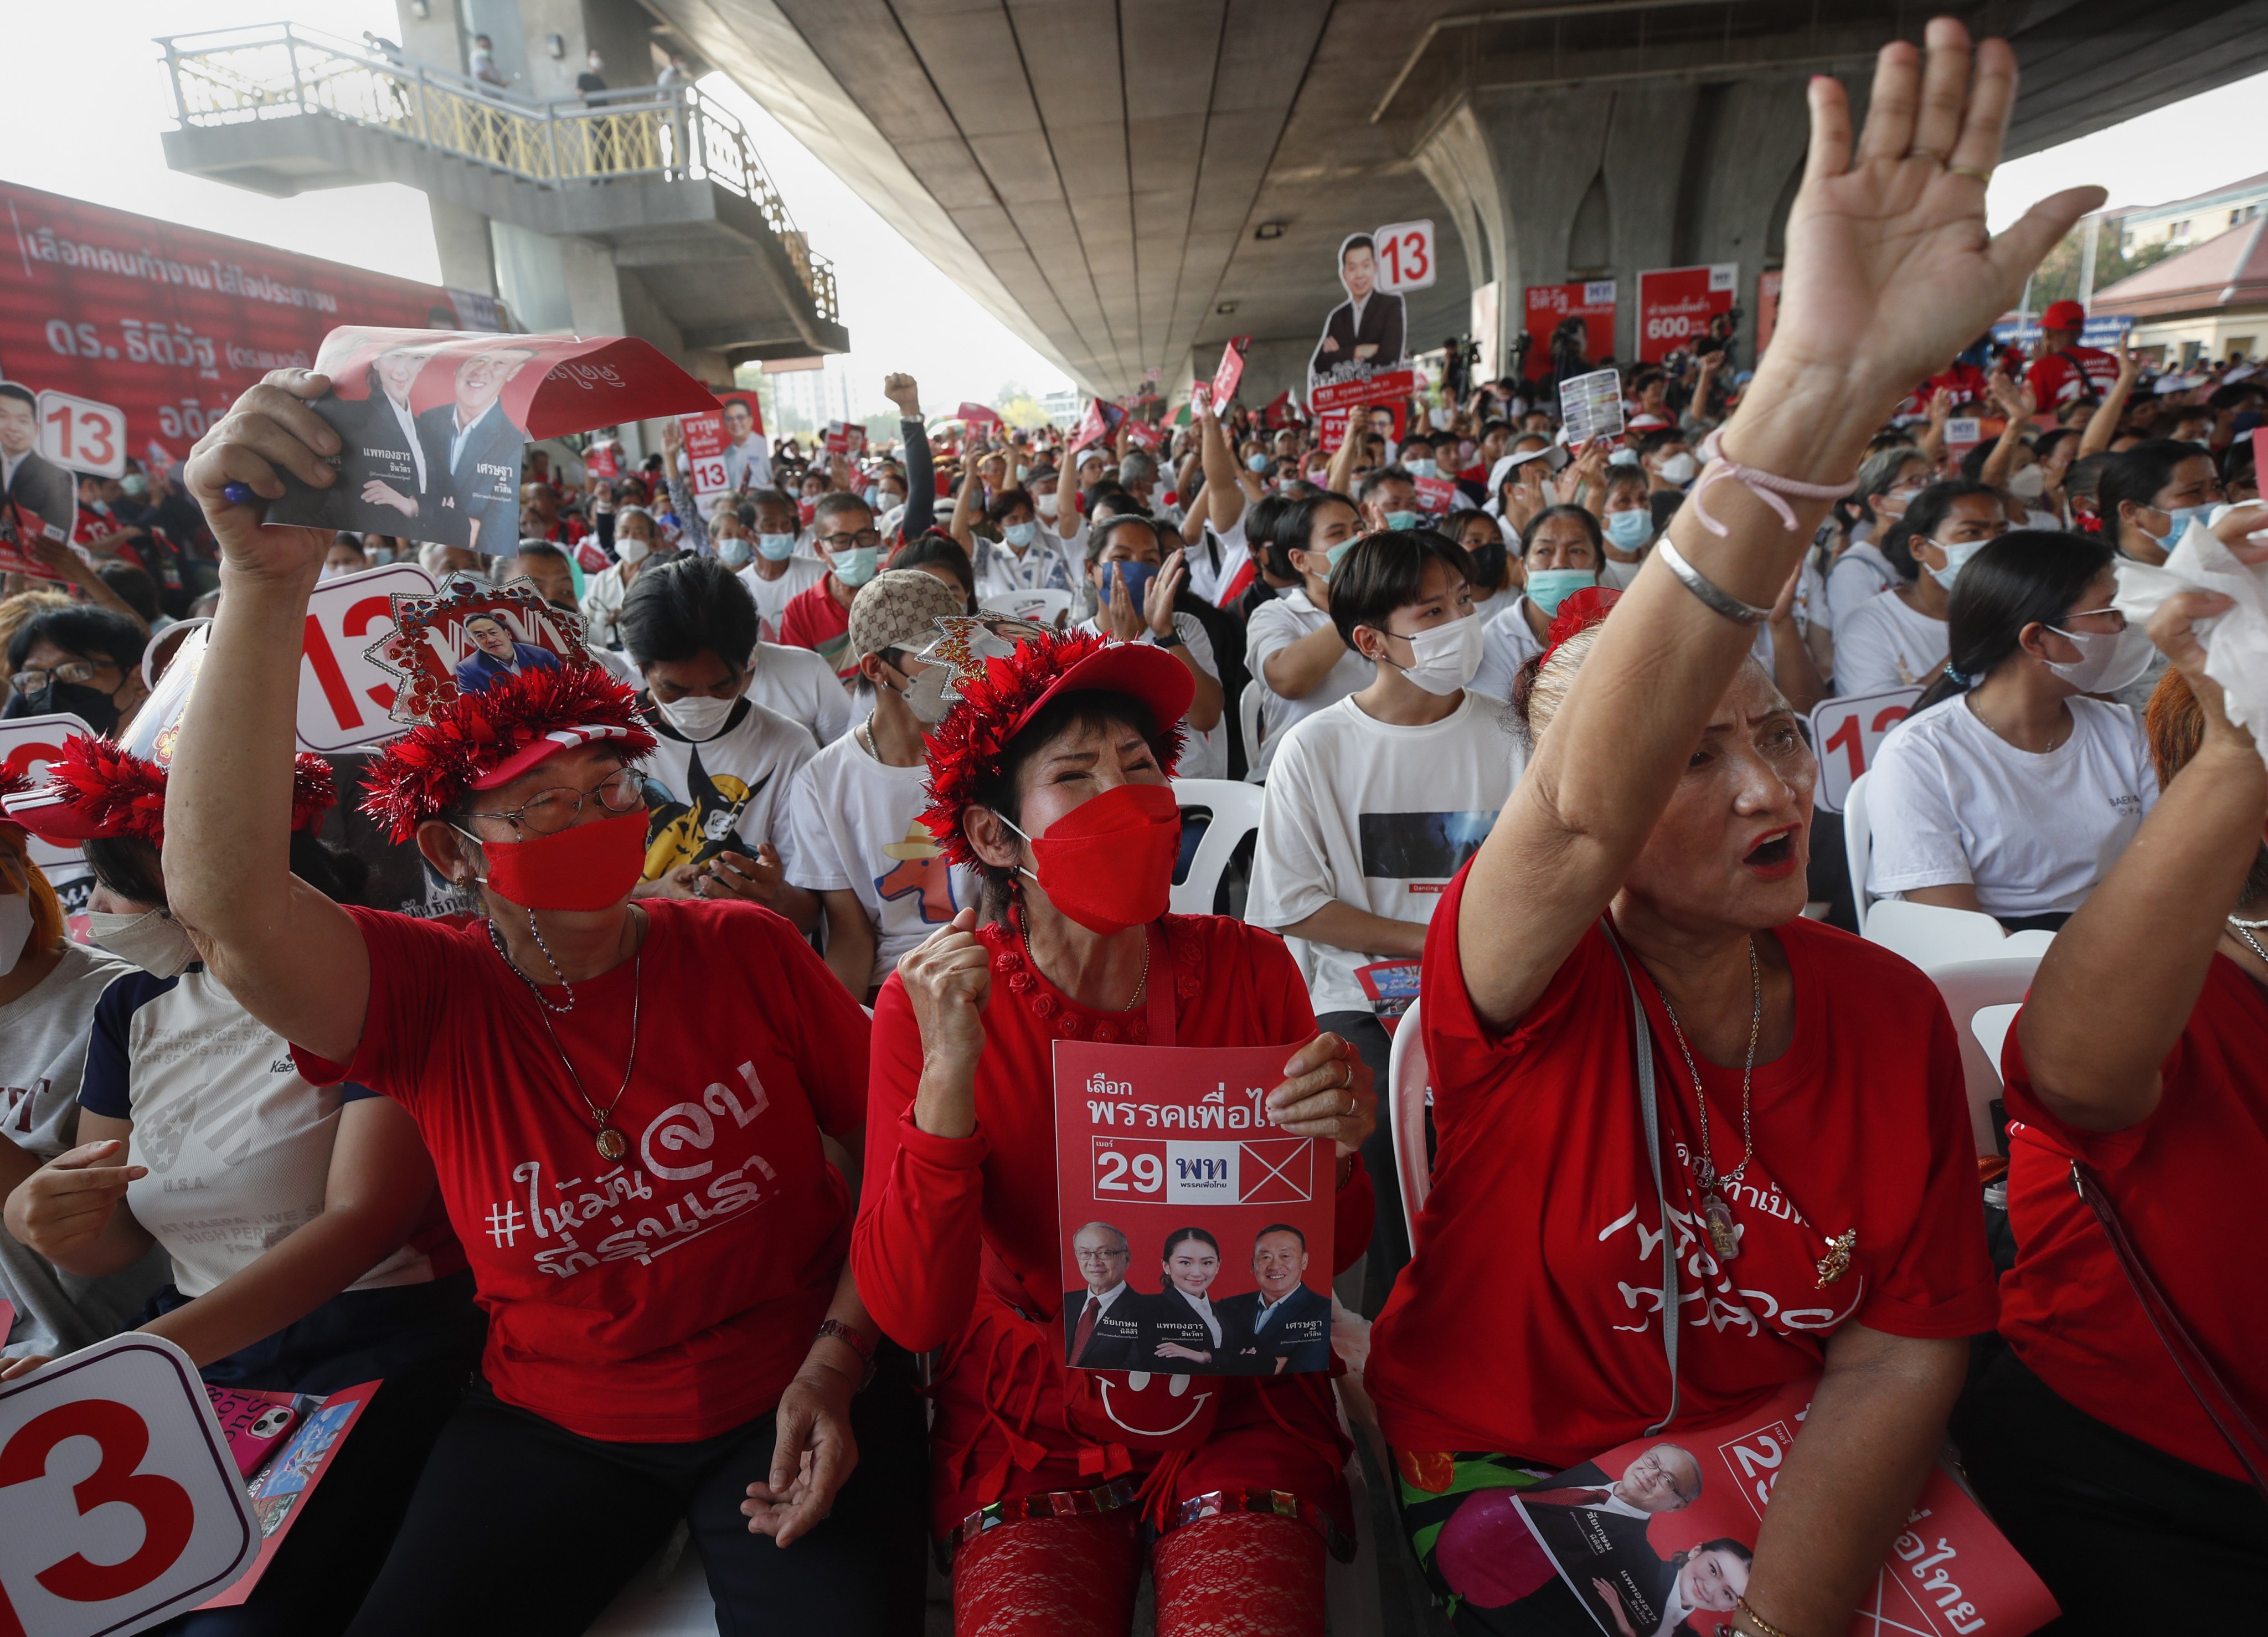 Supporters of the Pheu Thai party cheer during an election campaign rally in Bangkok. Photo: EPA-EFE